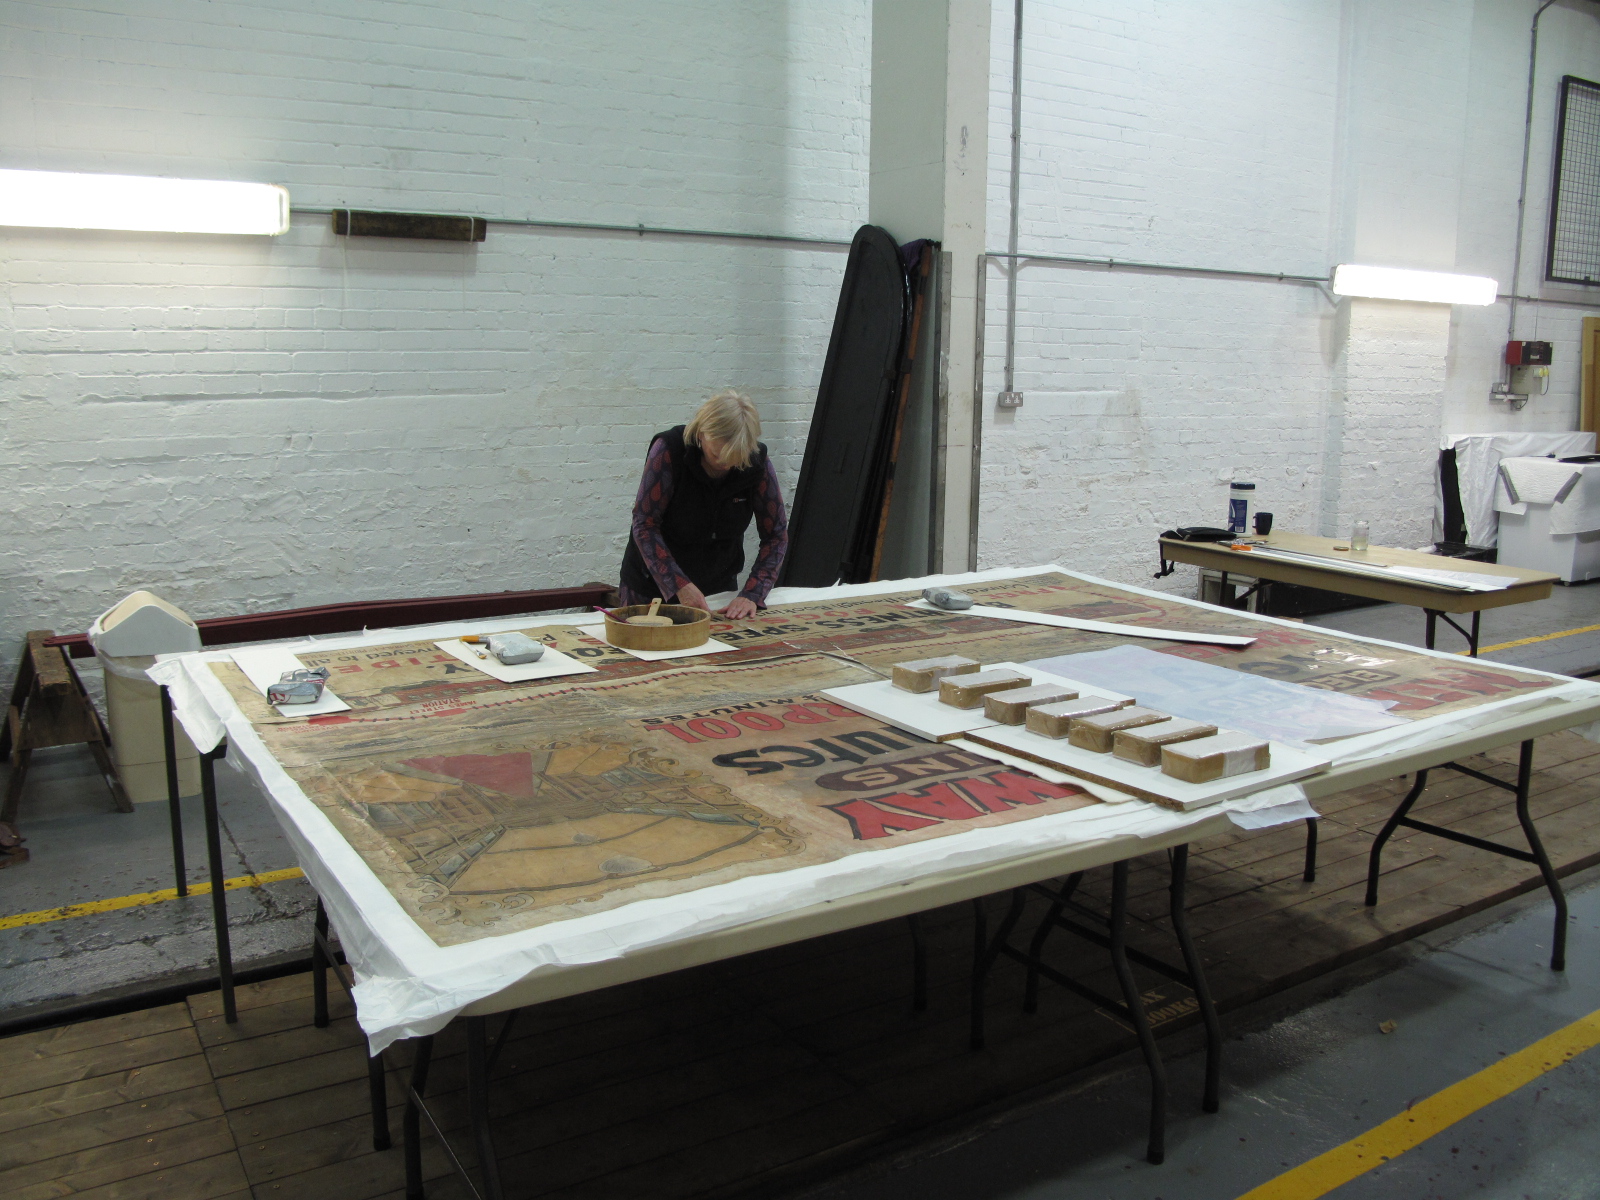 The poster was made up of smaller individual sheets of paper much like a modern billboard. Here conservator Ruth rejoins the last of the sections.